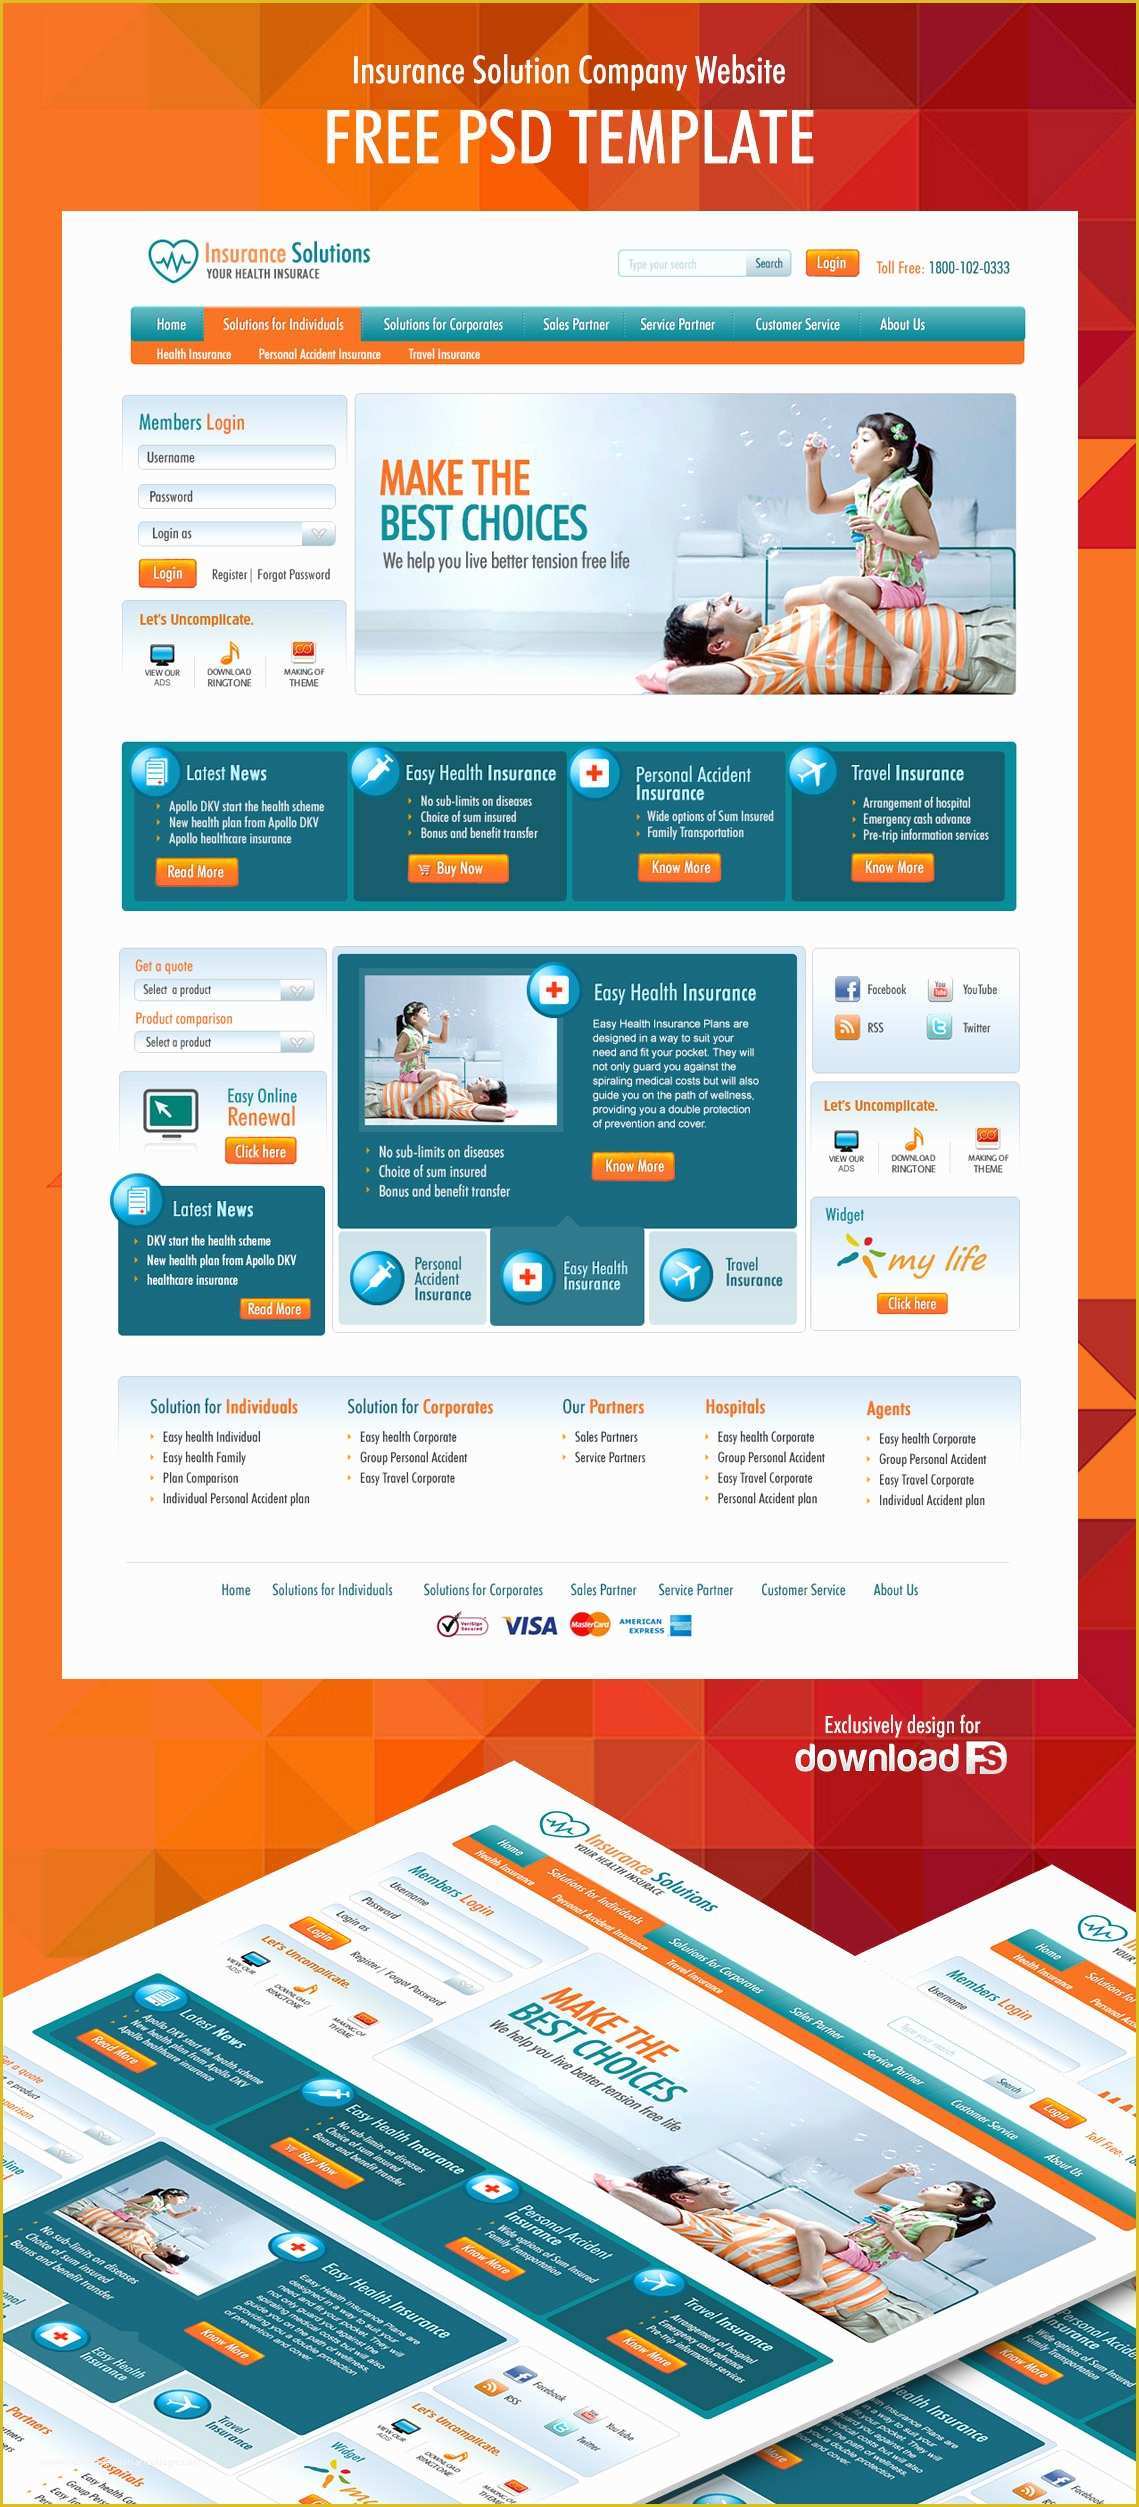 Life Insurance Website Templates Free Download Of Insurance solution Pany Website Psd Template by